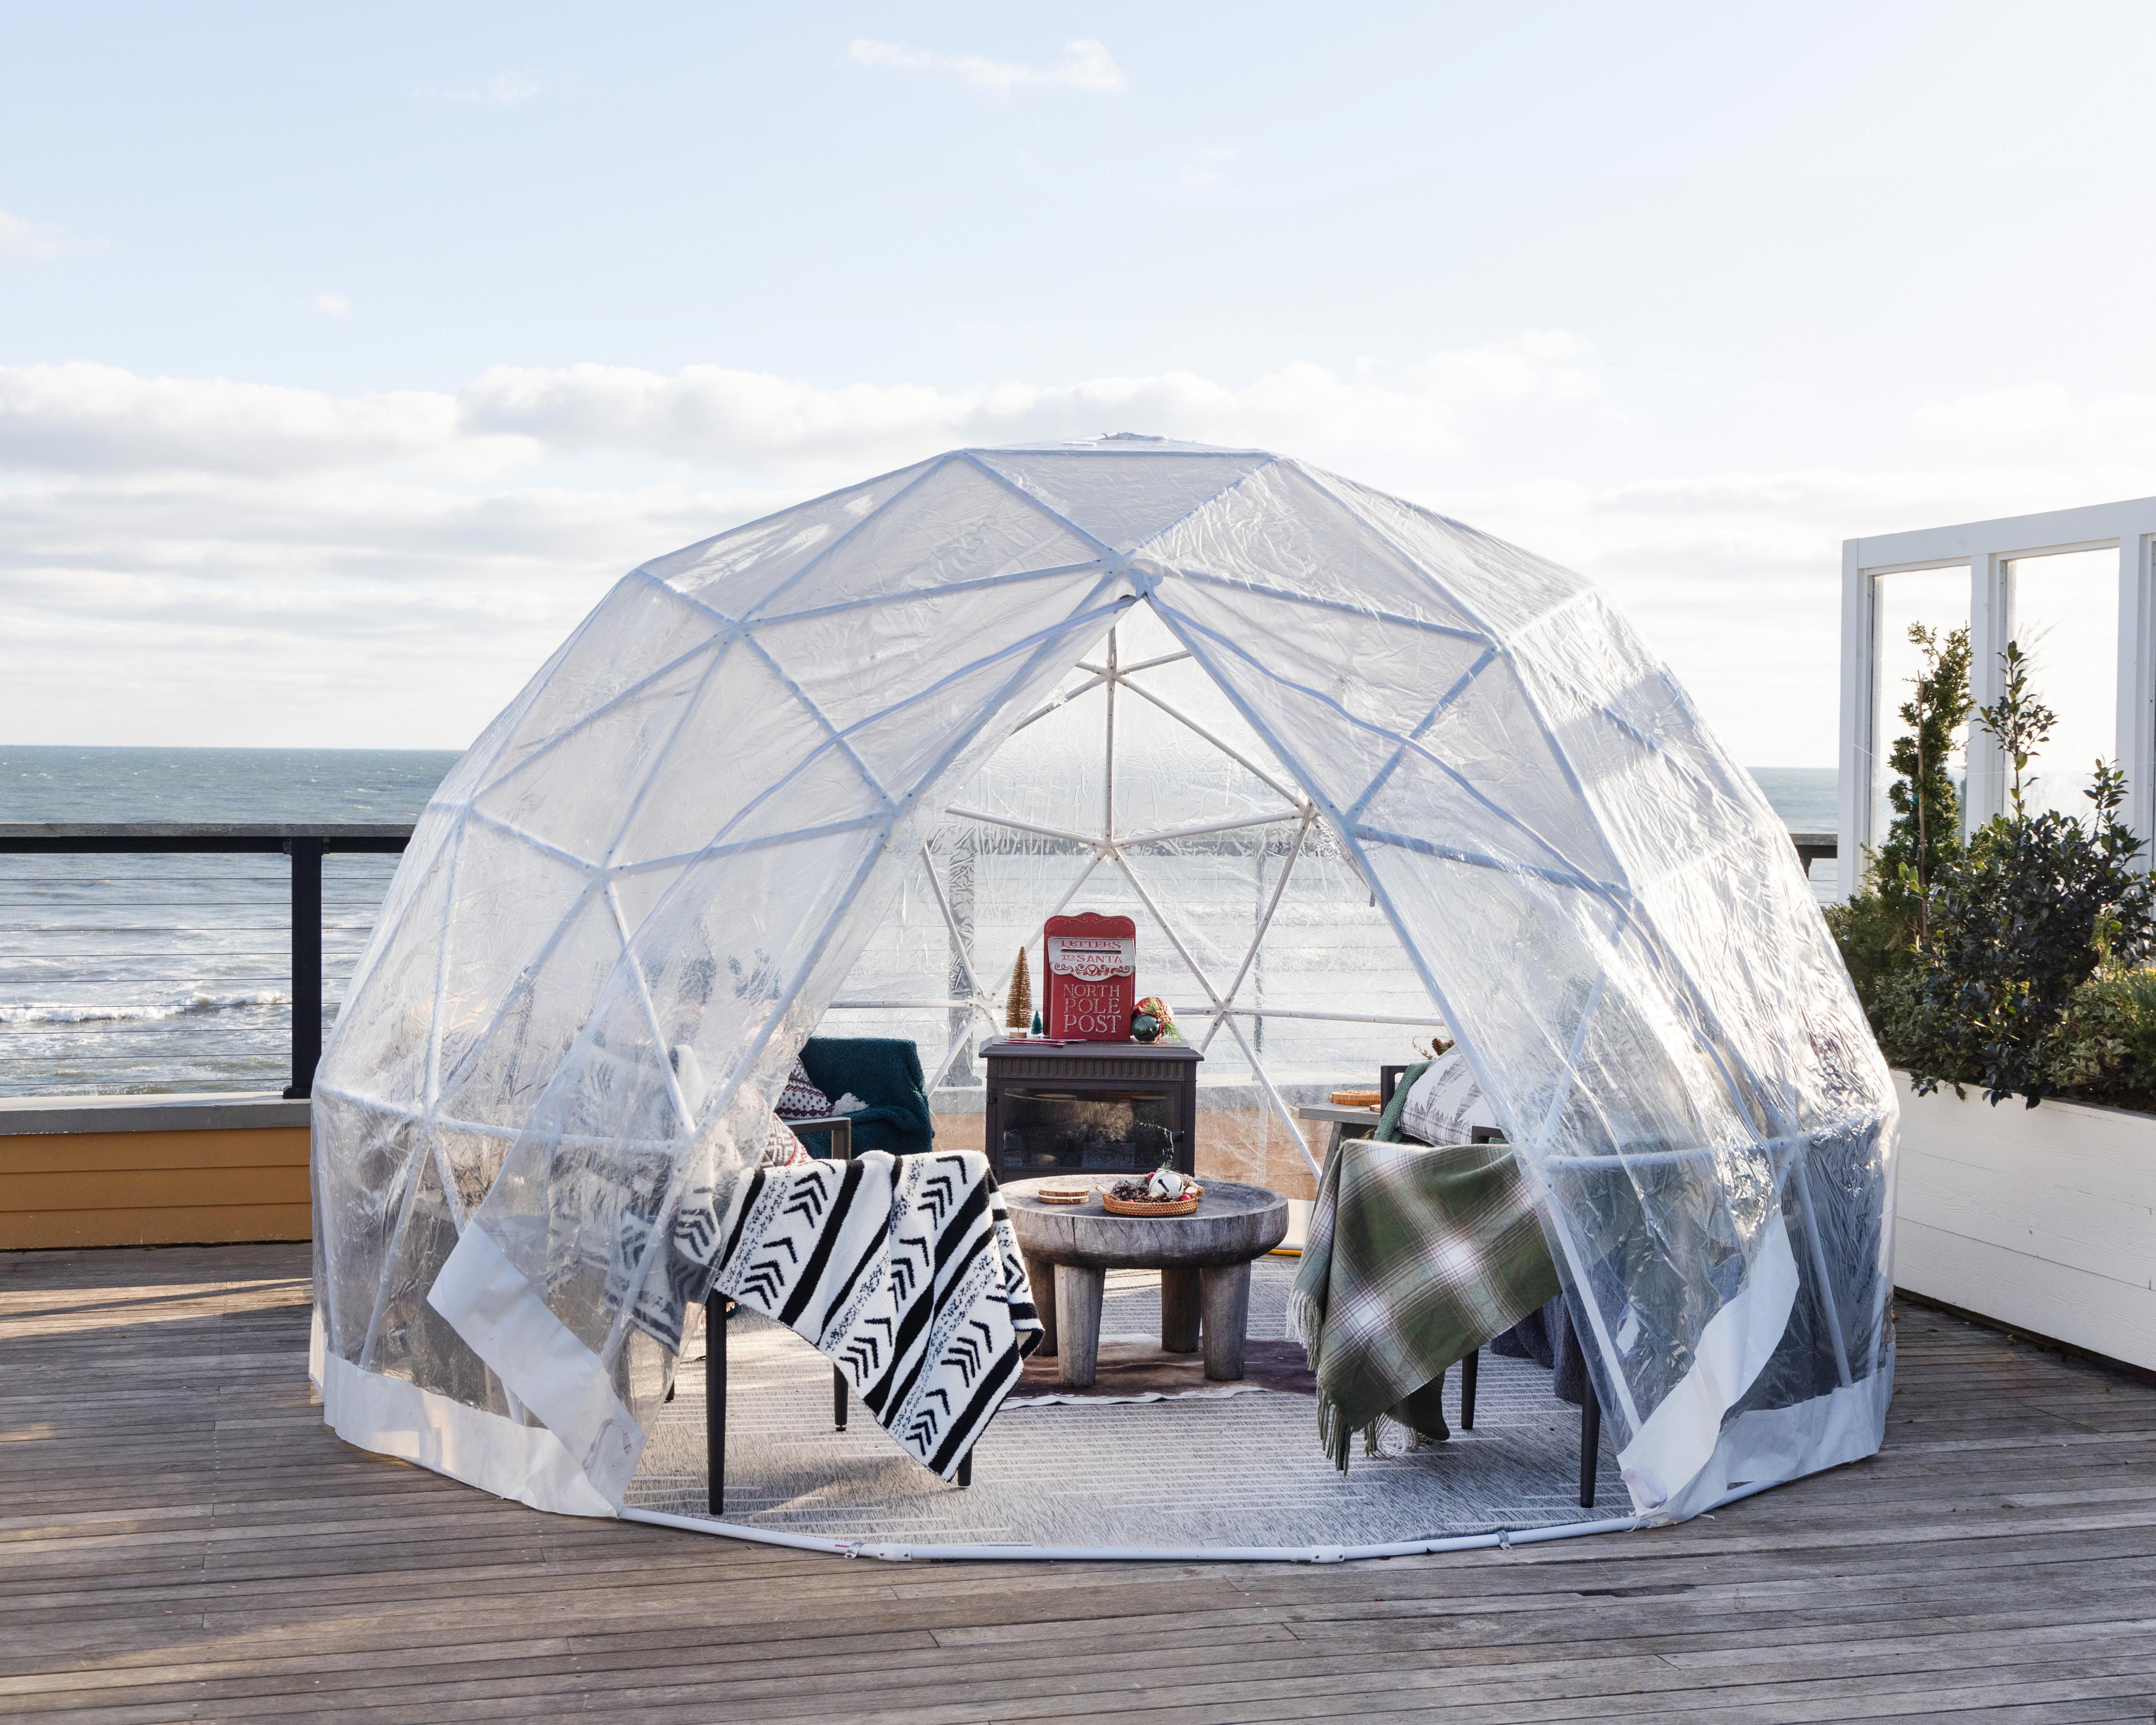 Igloo at Gurney's Montauk with comfortable chairs and Barefoot Dreams blankets.